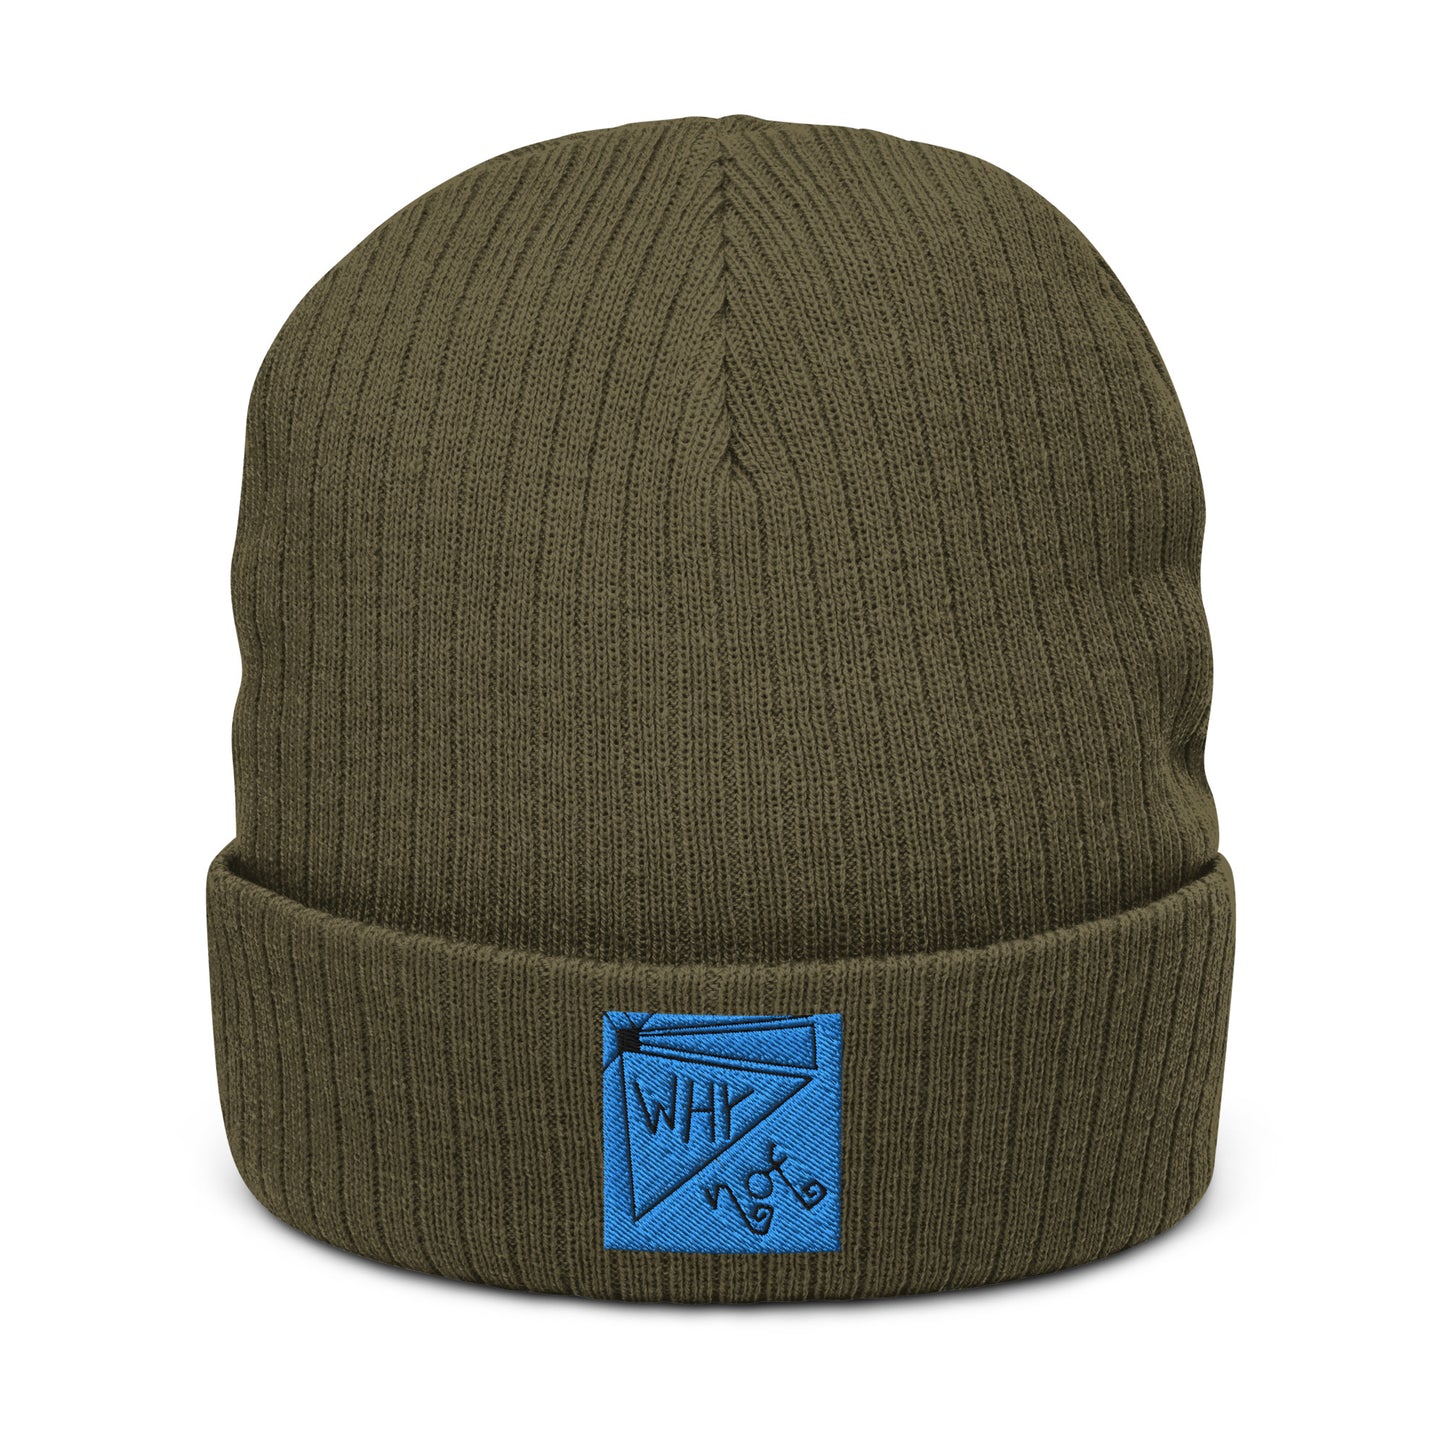 Ribbed "Why Not" Beanie